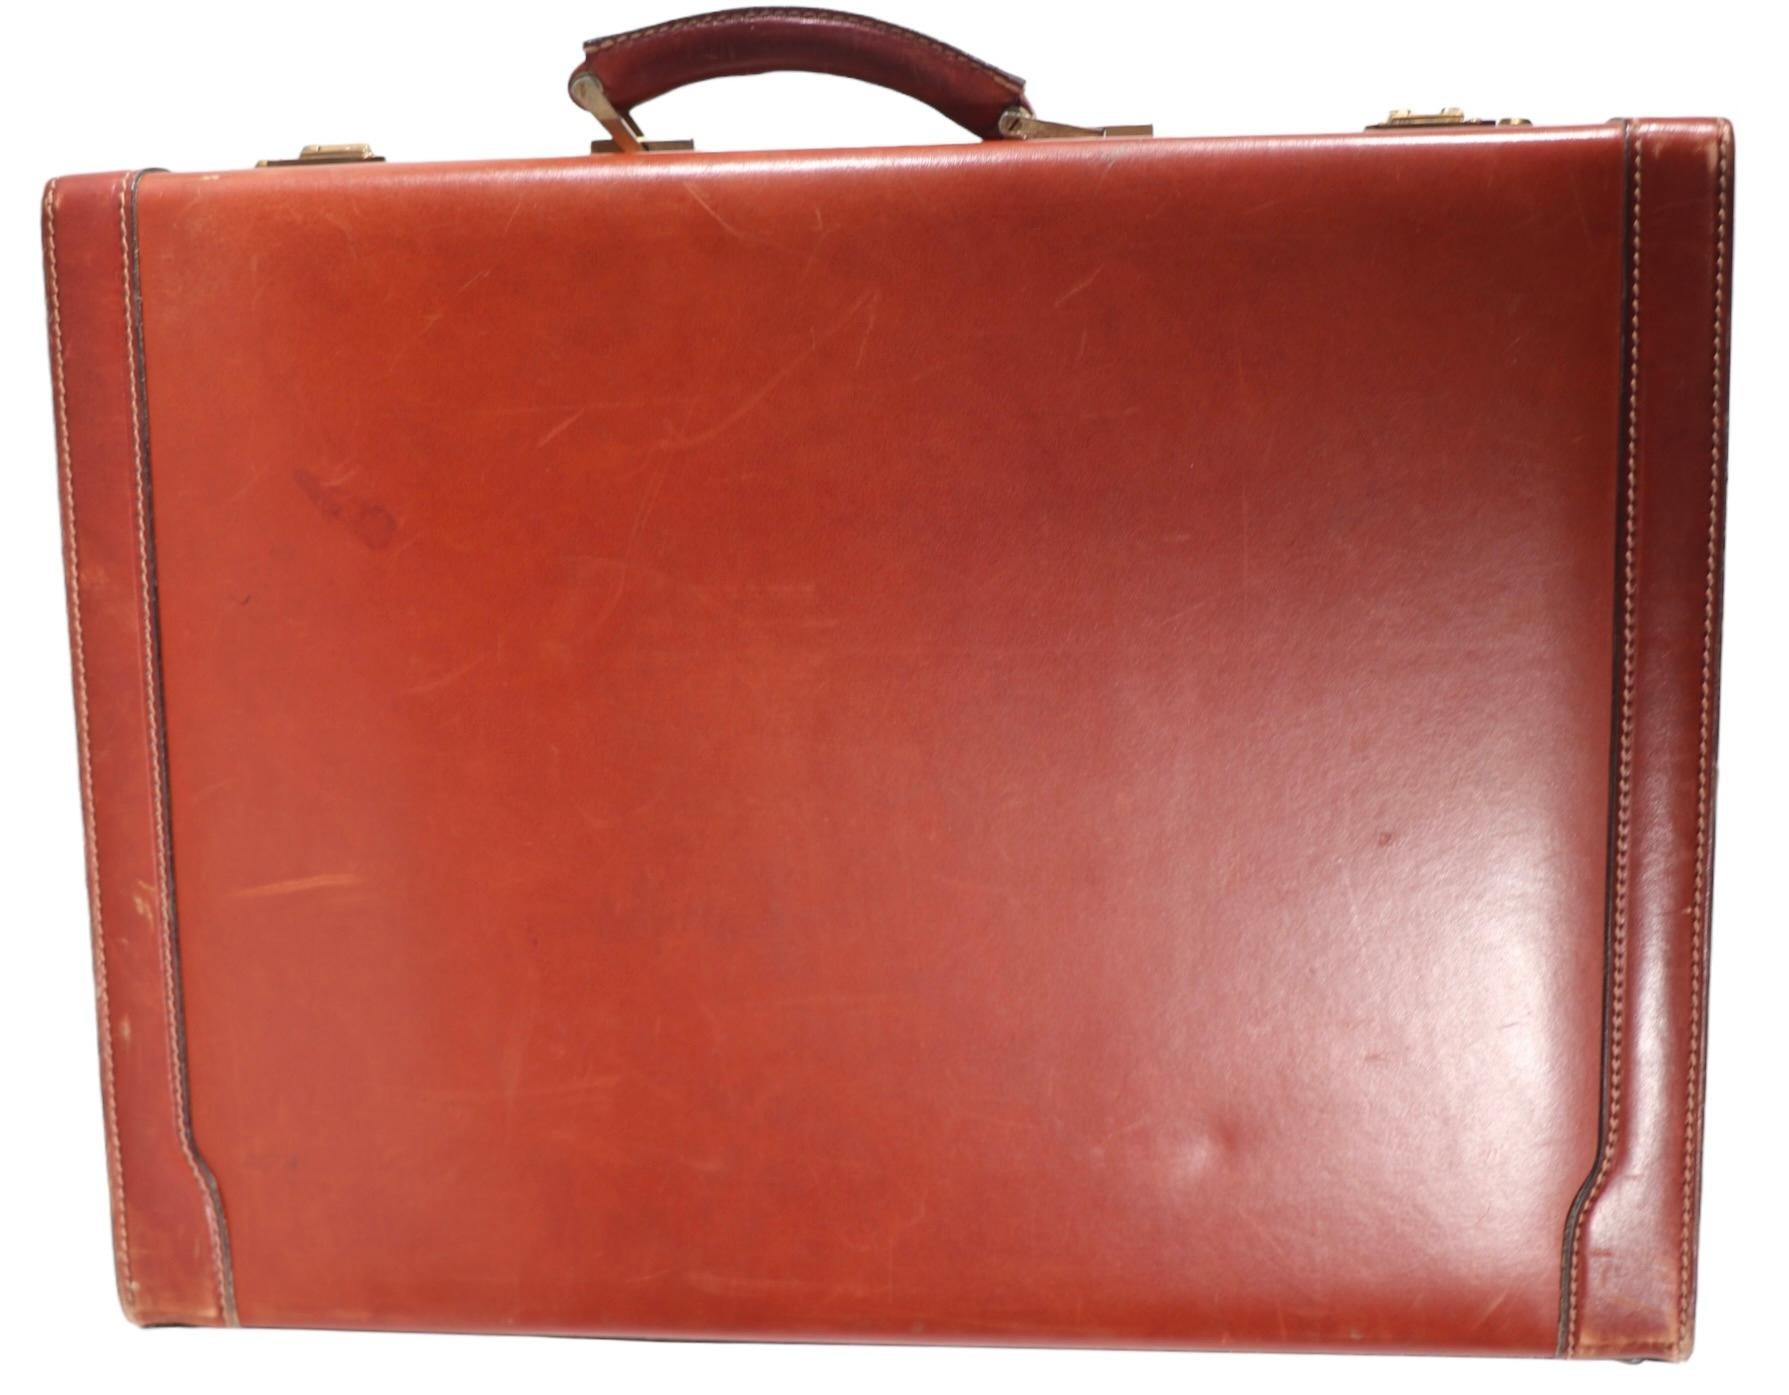  Mid Century Art Deco Hard Case Leather Attache Briefcase  after Bally, Hermes  For Sale 1